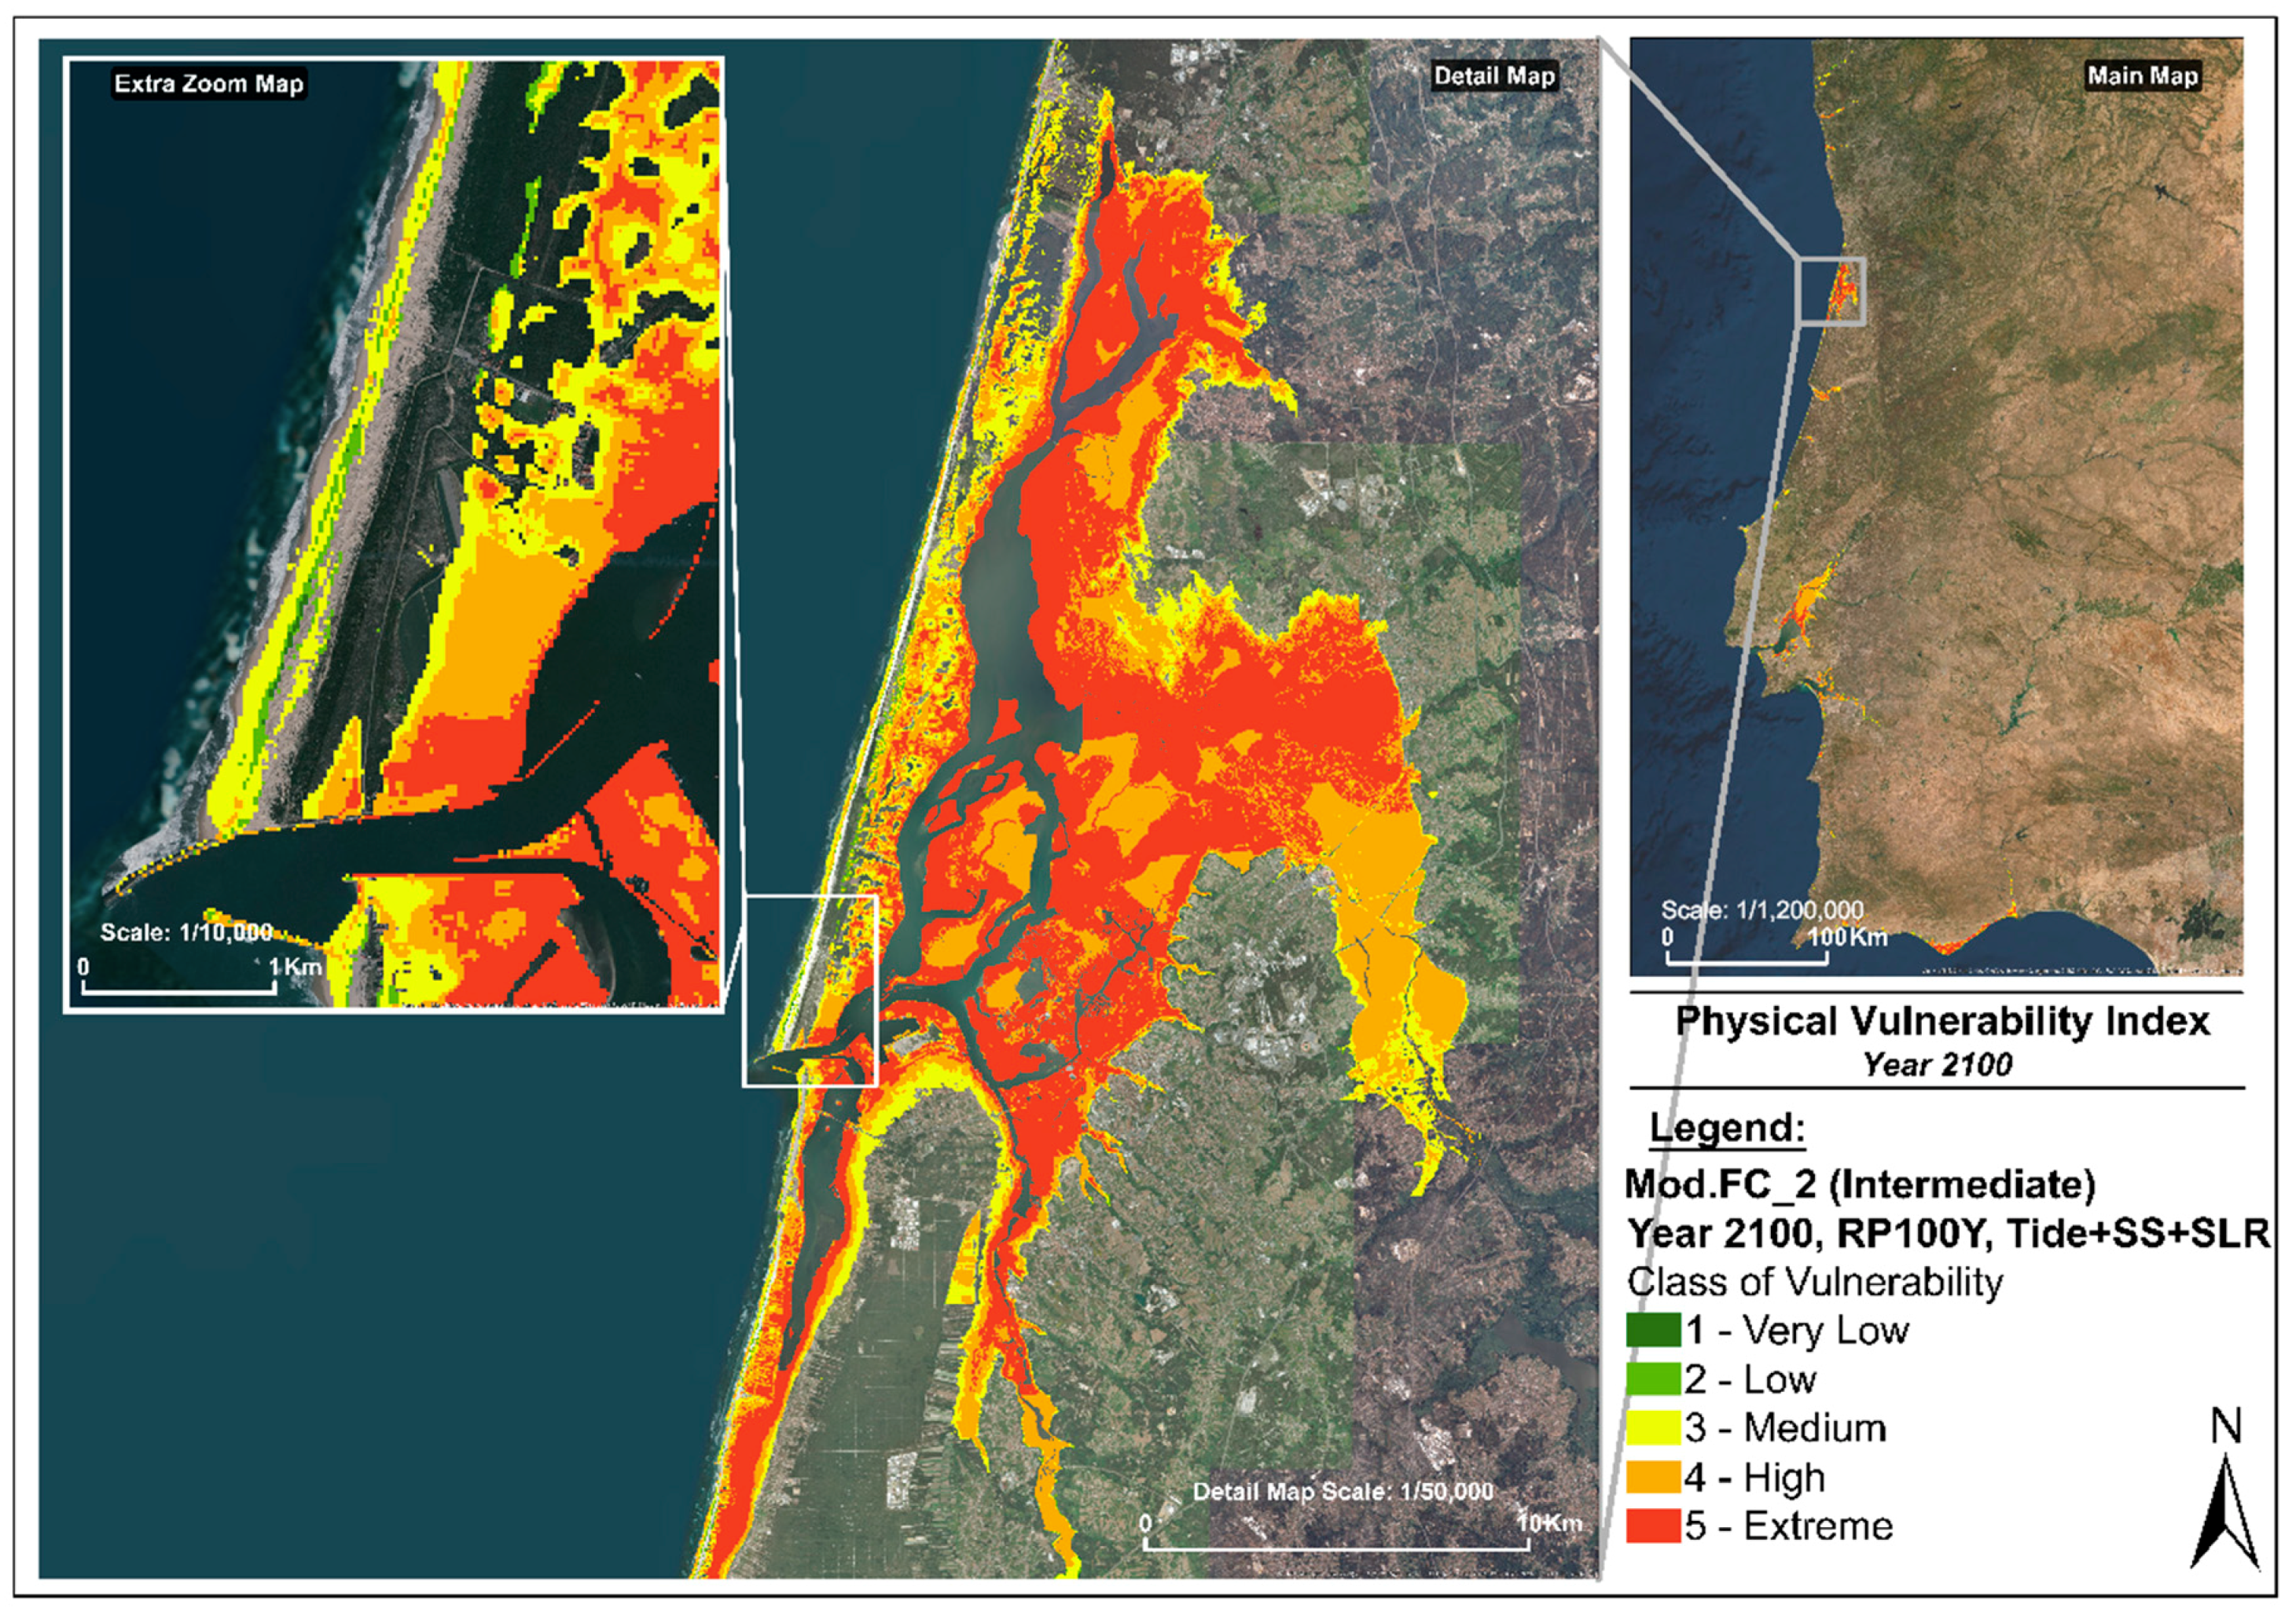 Sea Level Rise Projection Map - Buenos Aires